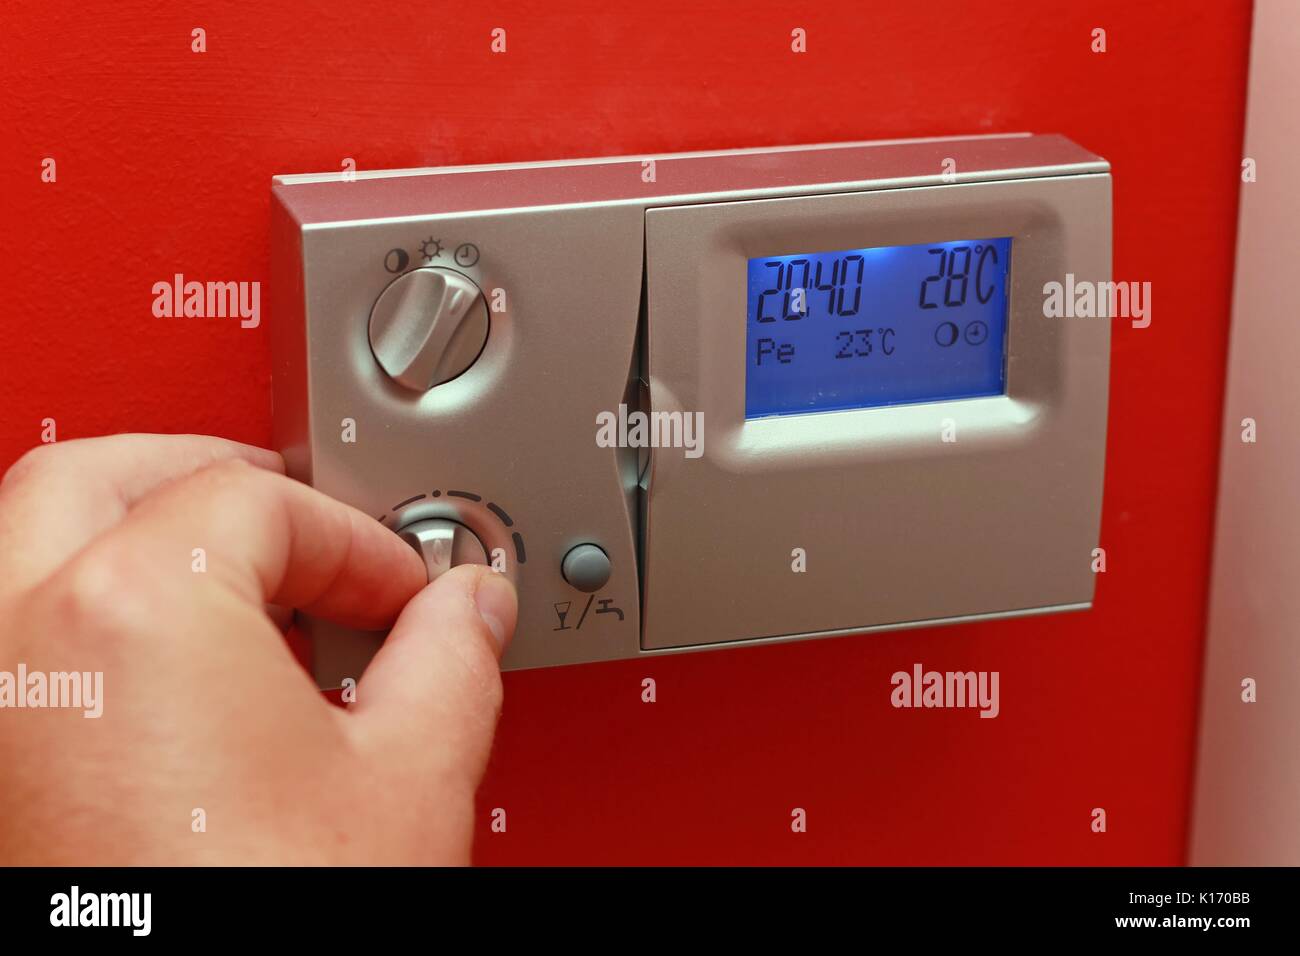 Control panel for heat at home. Stock Photo